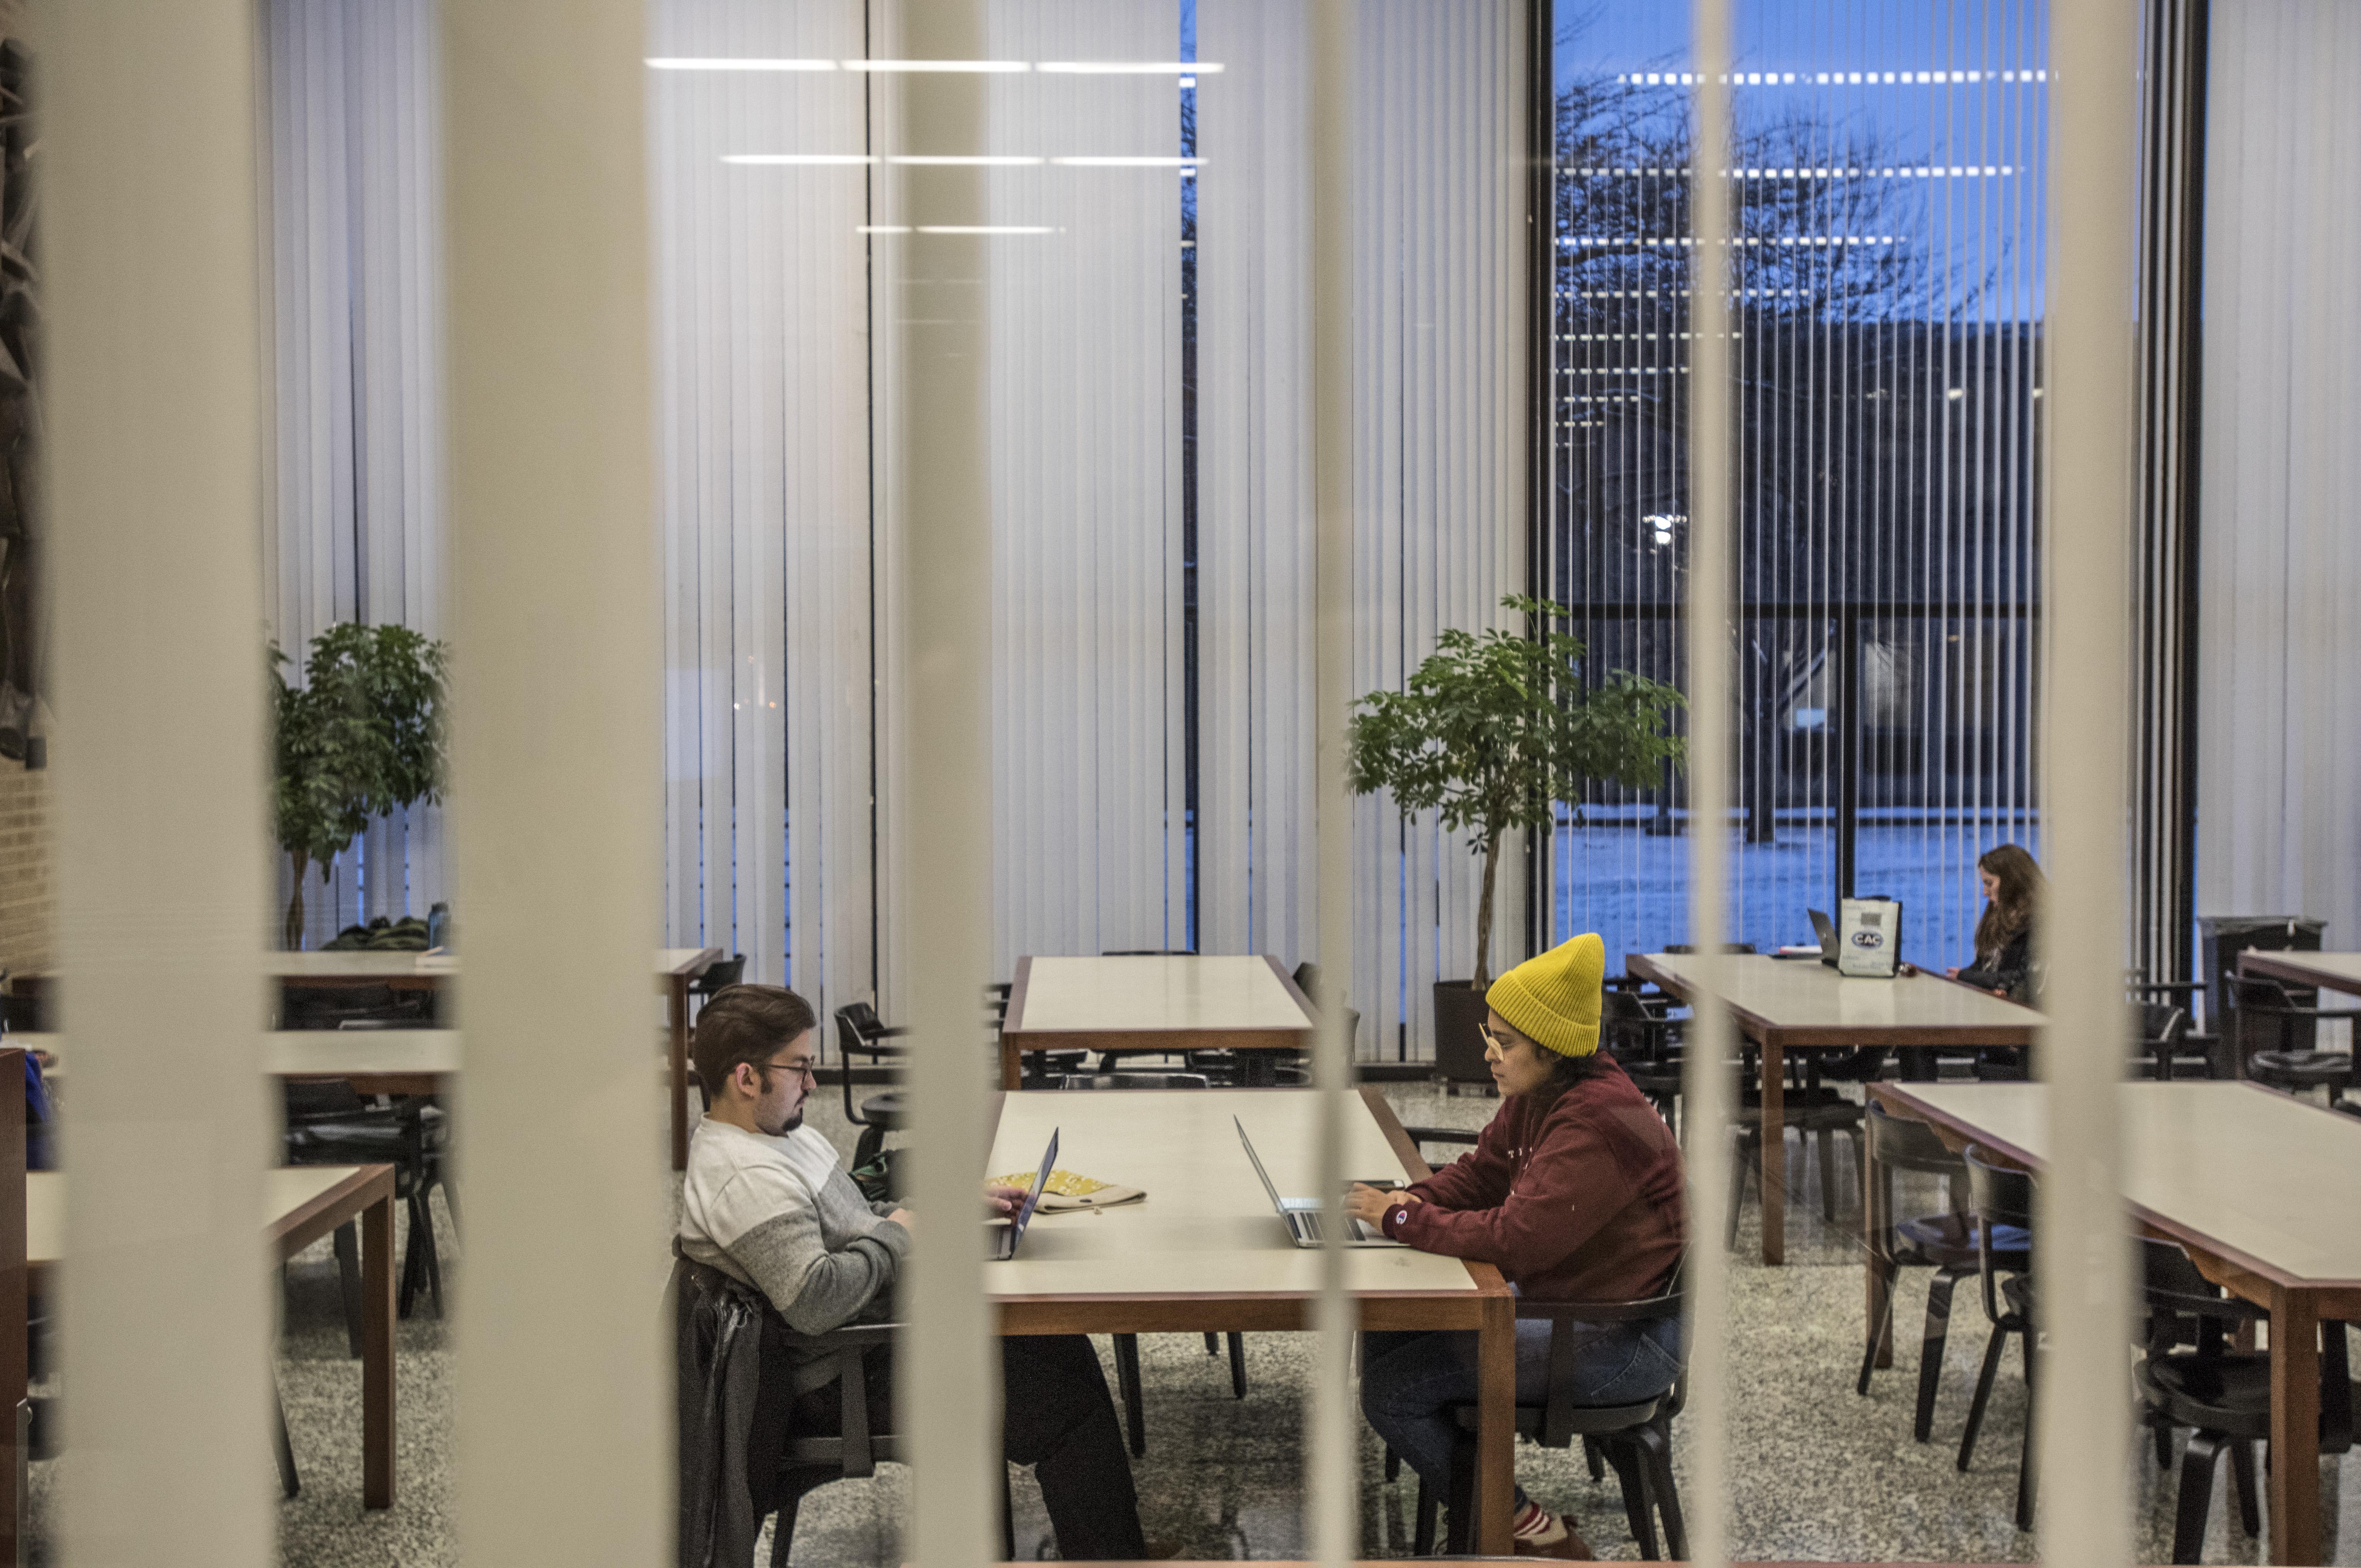 Students sitting in the library viewed through blinds